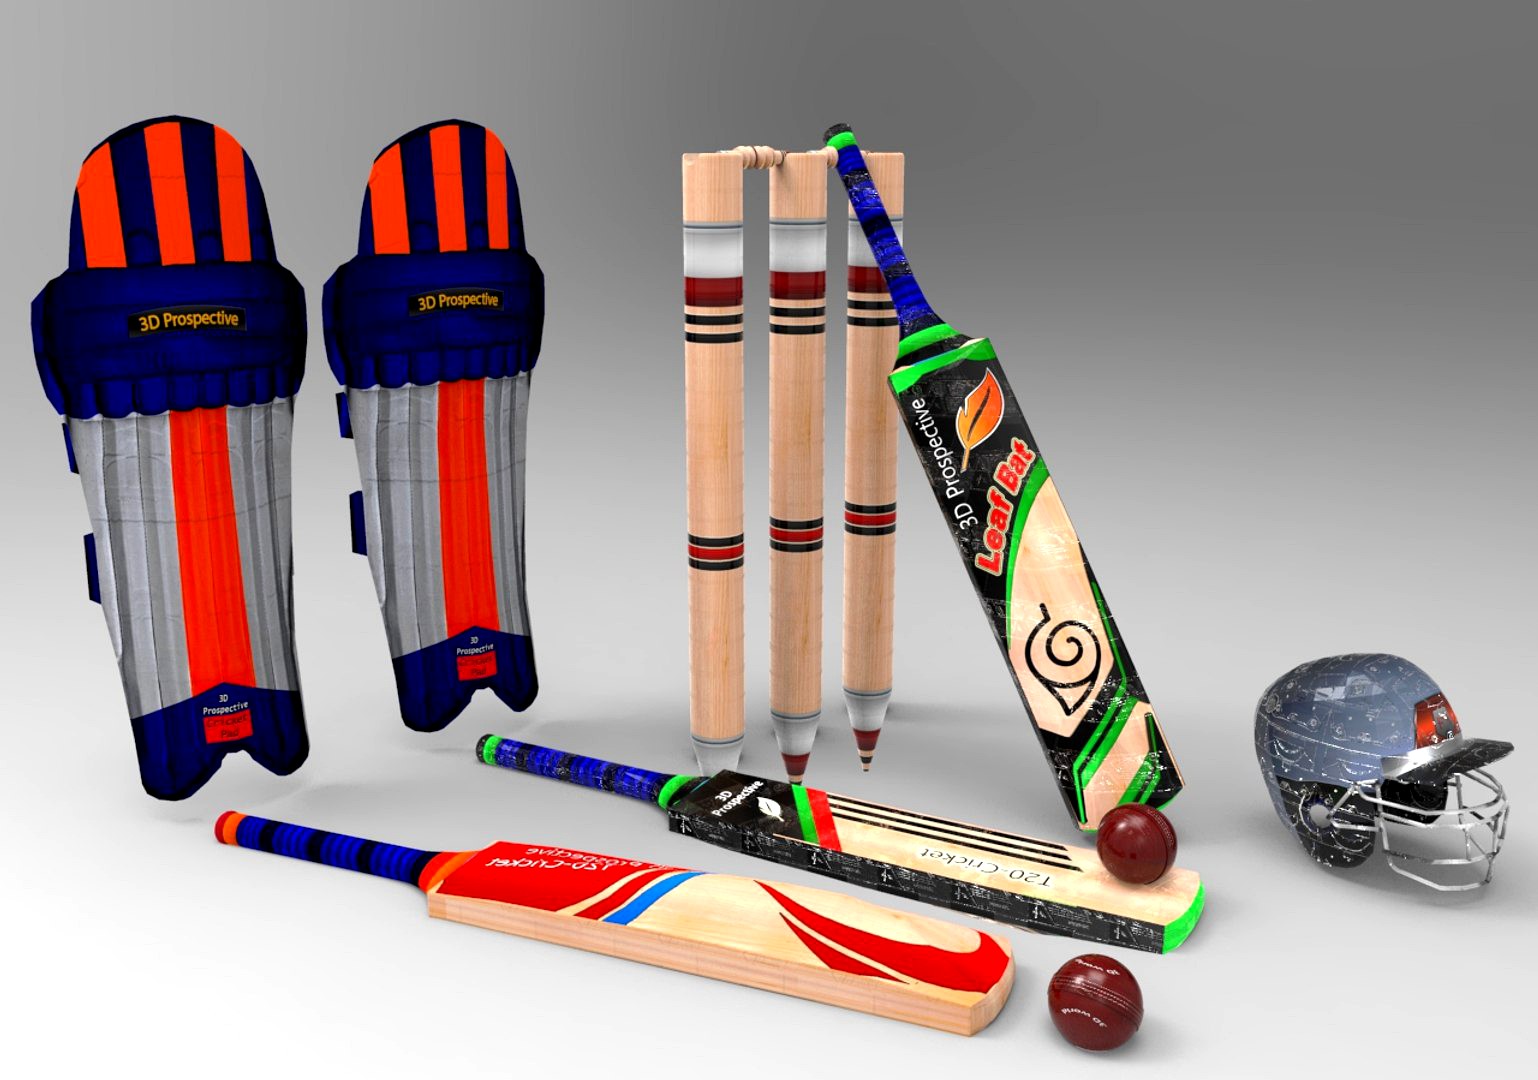 Cricket Practice pitch kit Pack